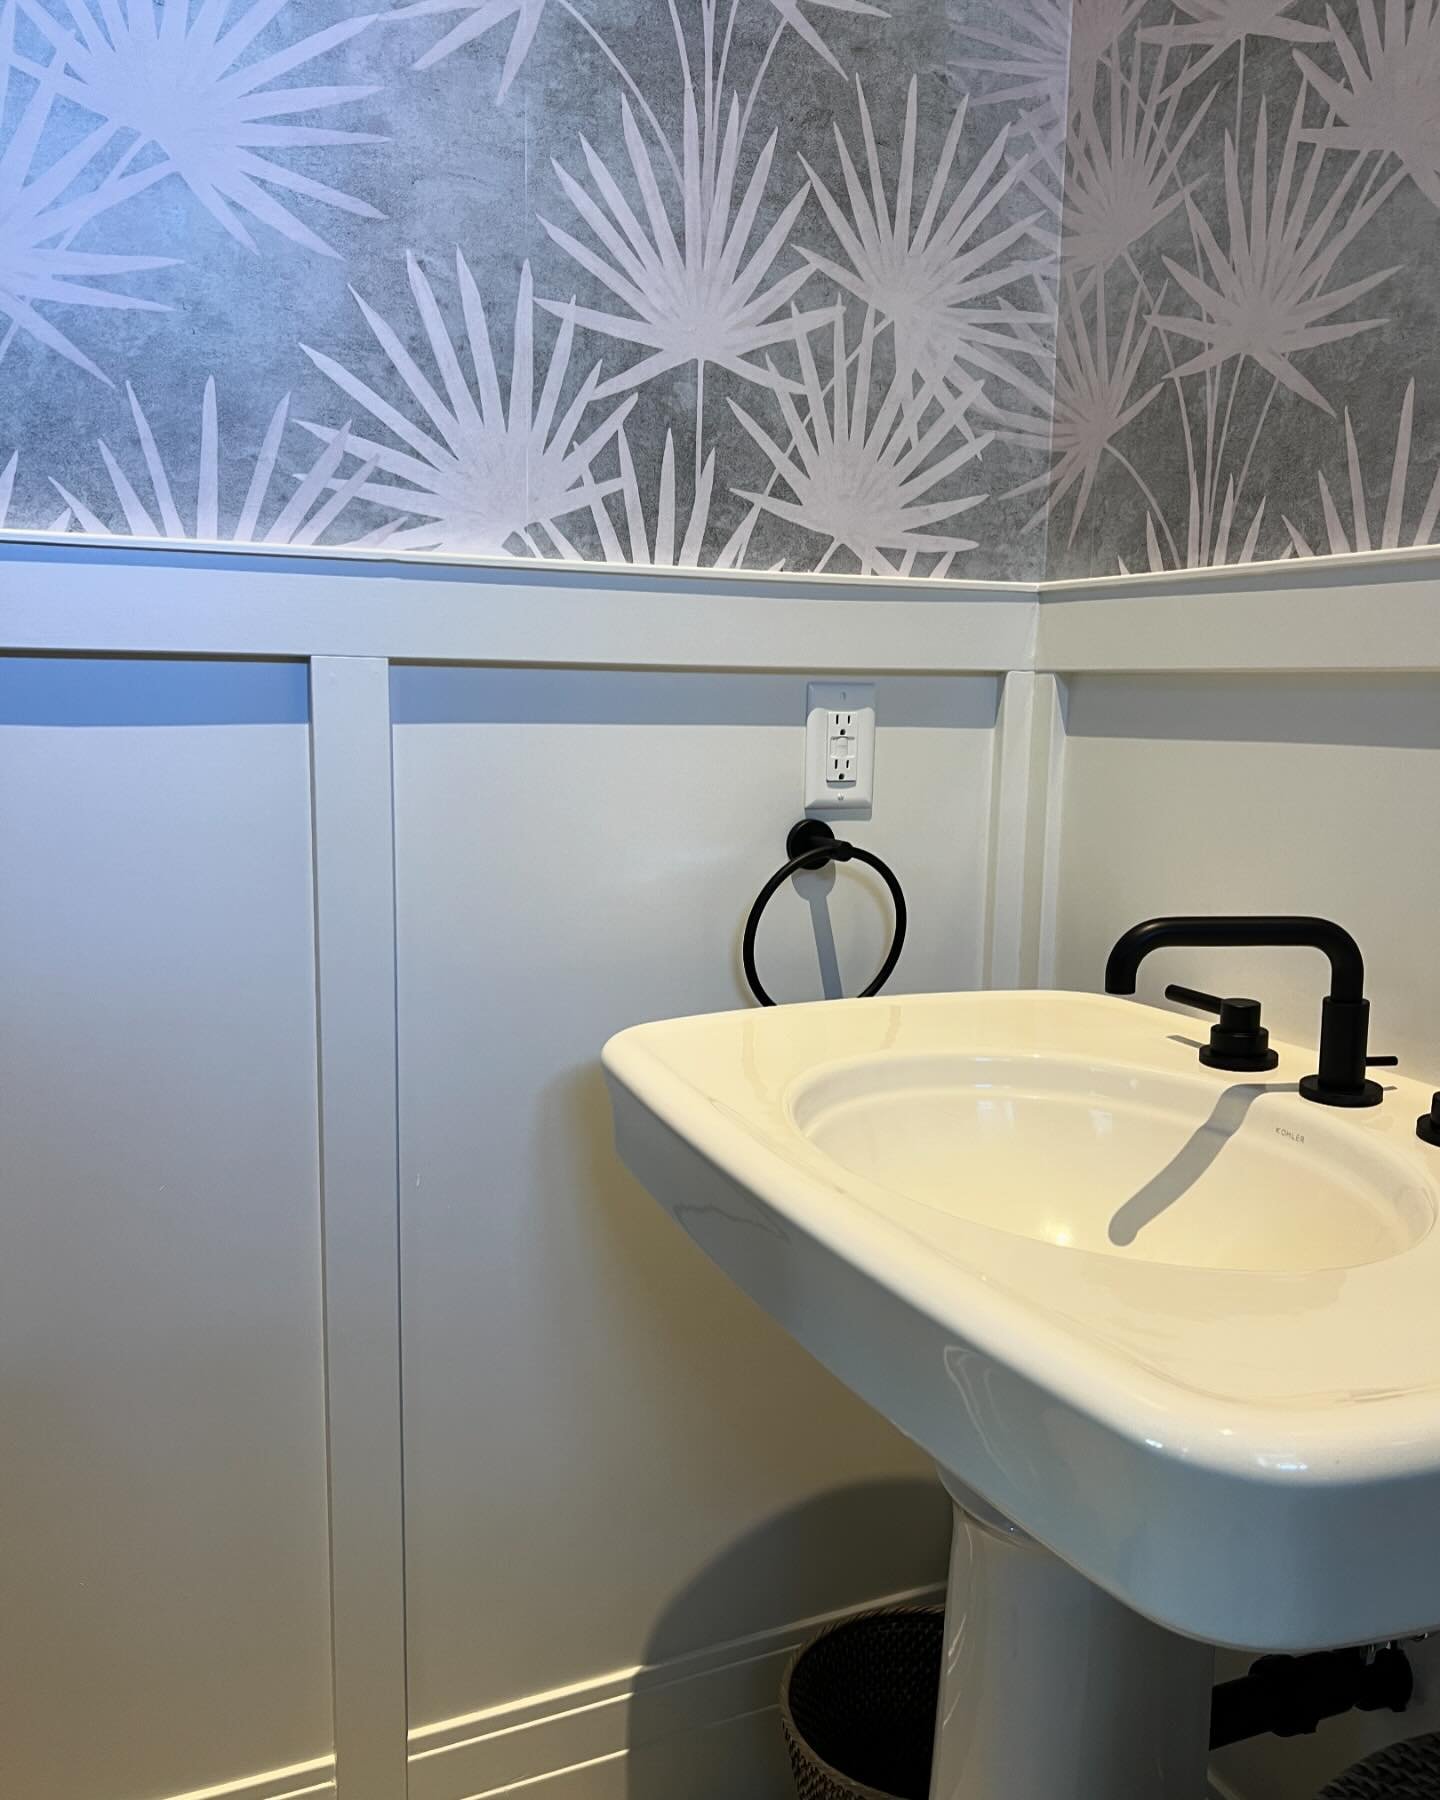 Milton King wallpaper thank you for your great customer service. And, look at how the corners line up! This bathroom is coming together. Wait for more. #miltonkingwallpaper #wallpaper#parkcitydesigner #parkcitybathroomremodel #bathroomdesign #palms